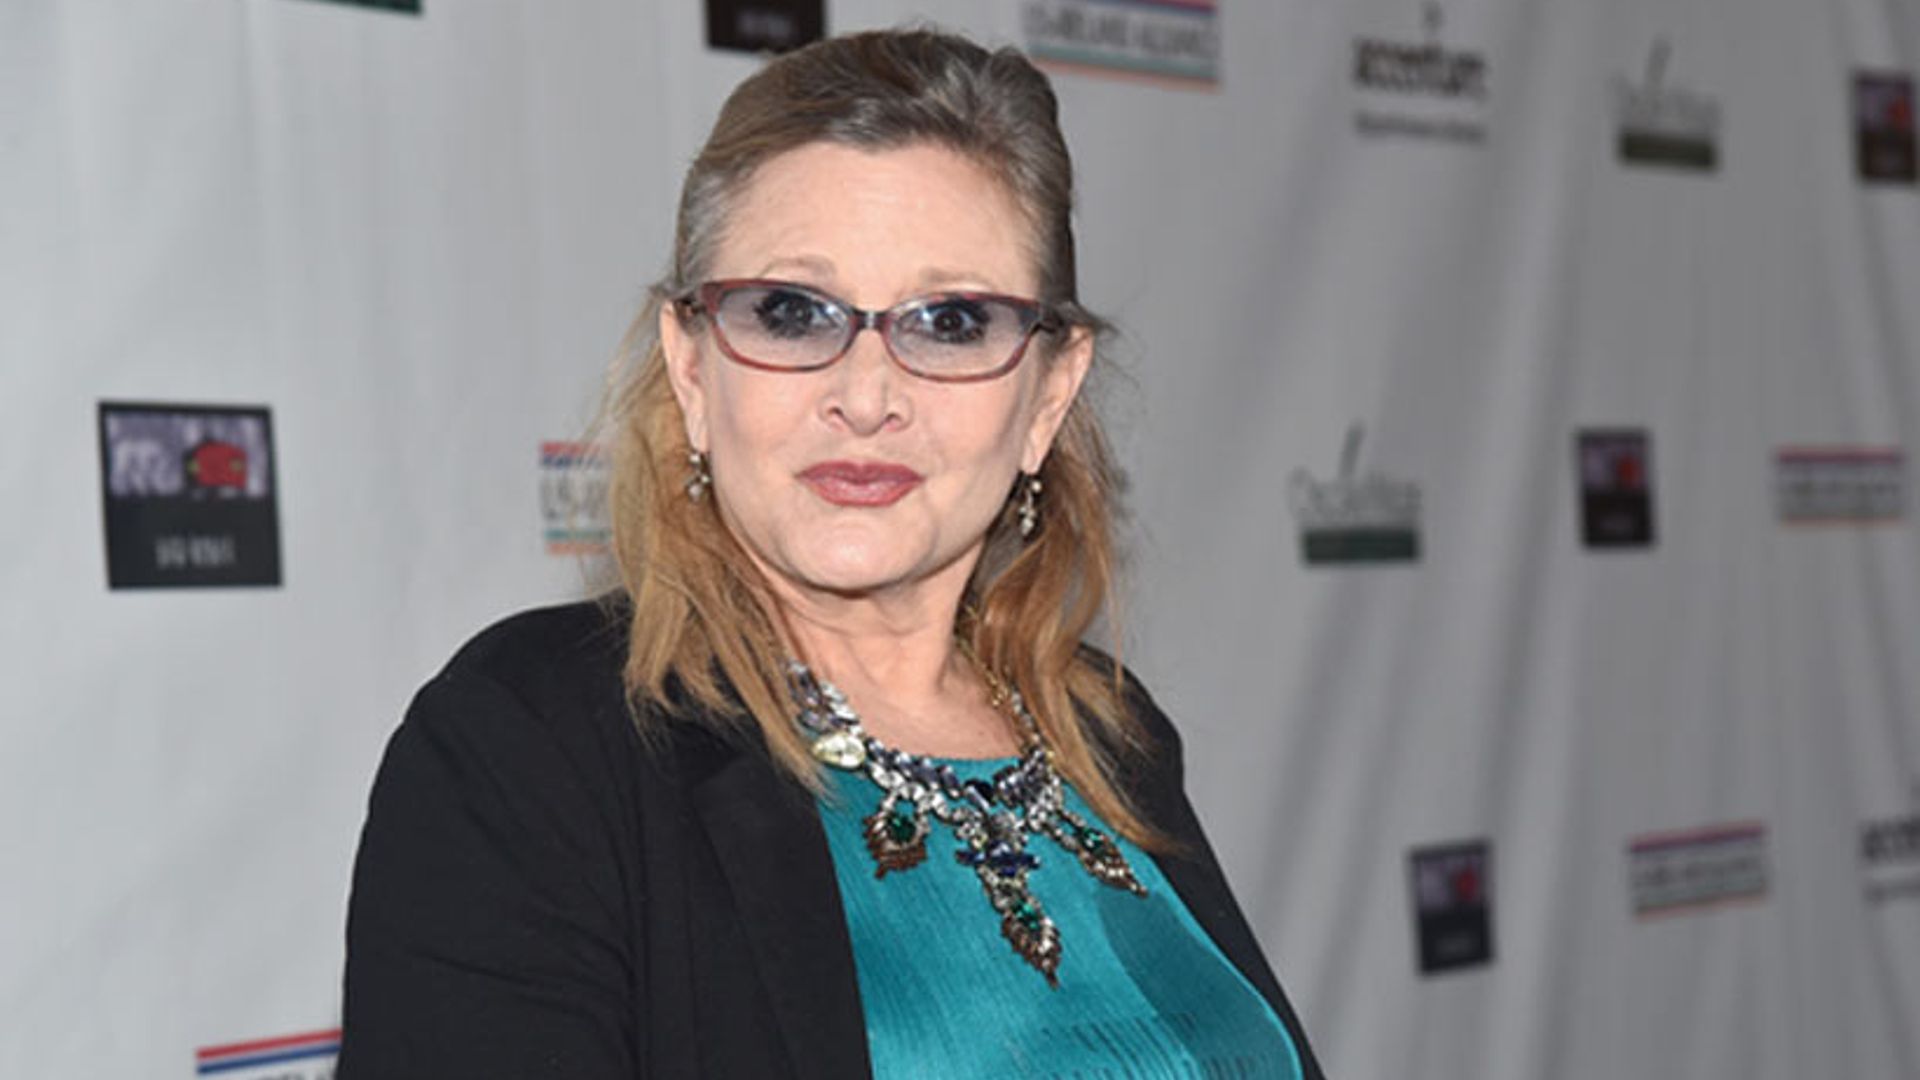 BREAKING NEWS: Carrie Fisher dies, aged 60